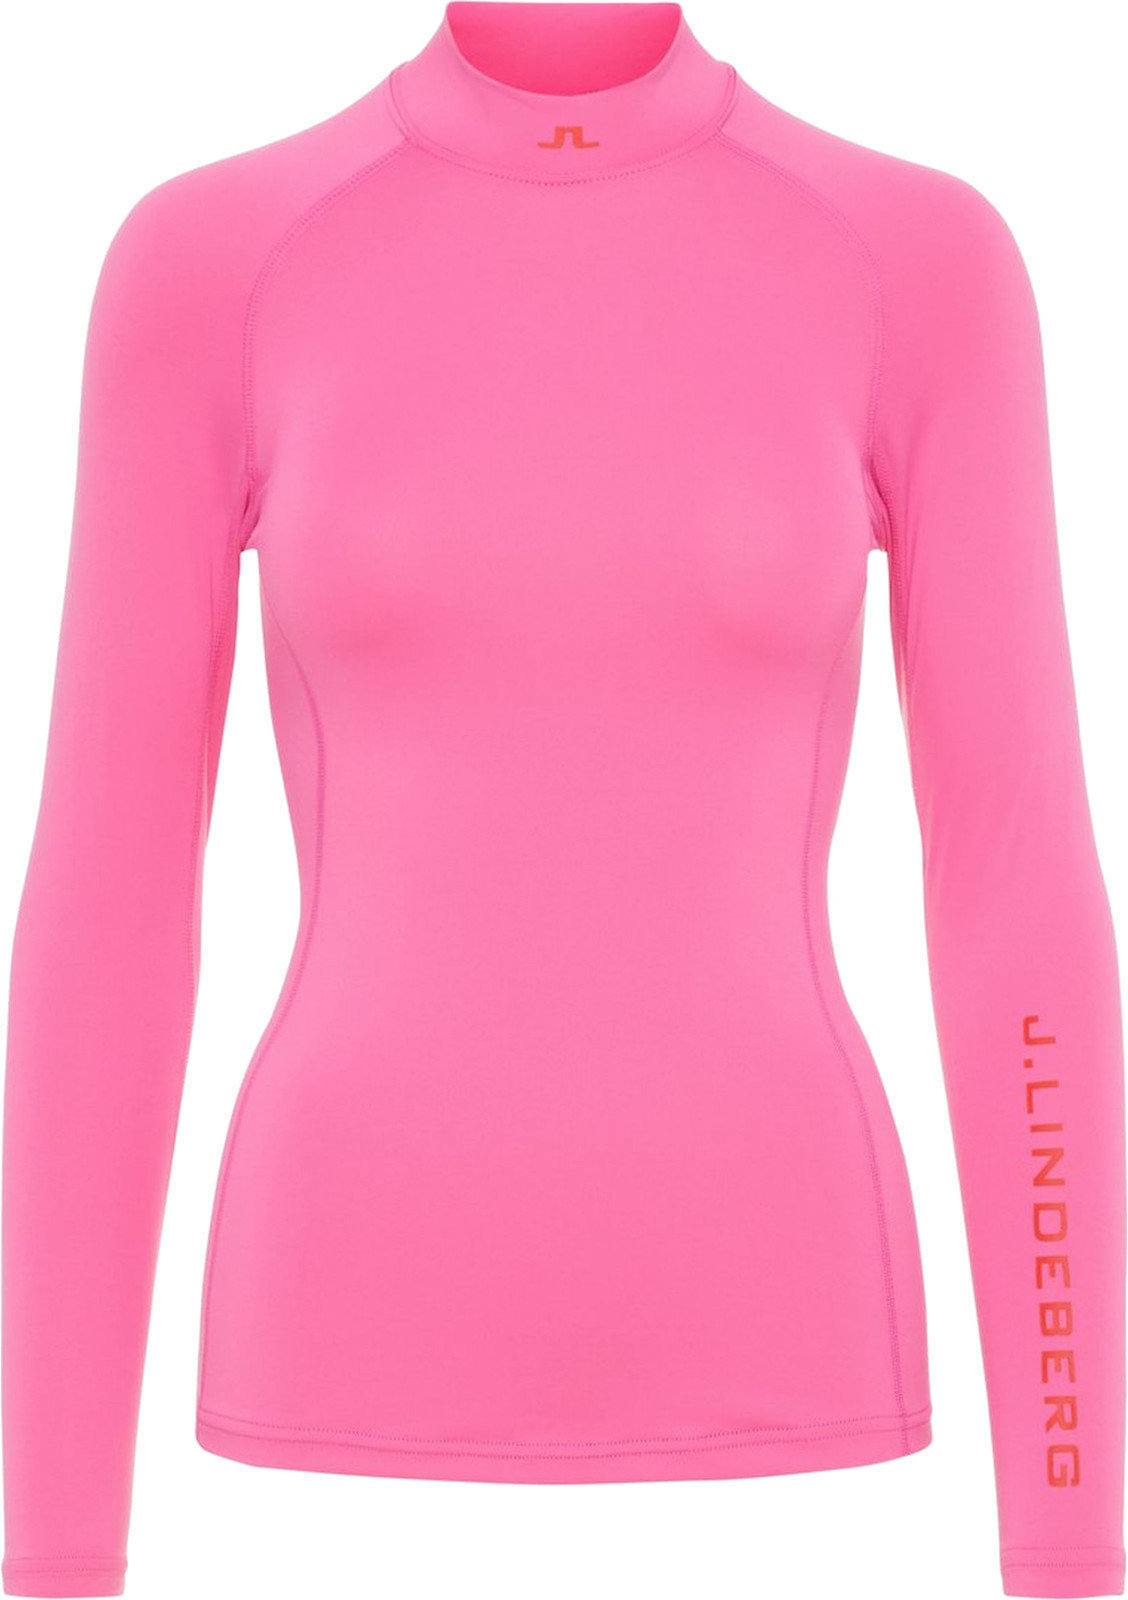 Thermo ondergoed J.Lindeberg Asa Soft Compression Womens Base Layer Pop Pink M